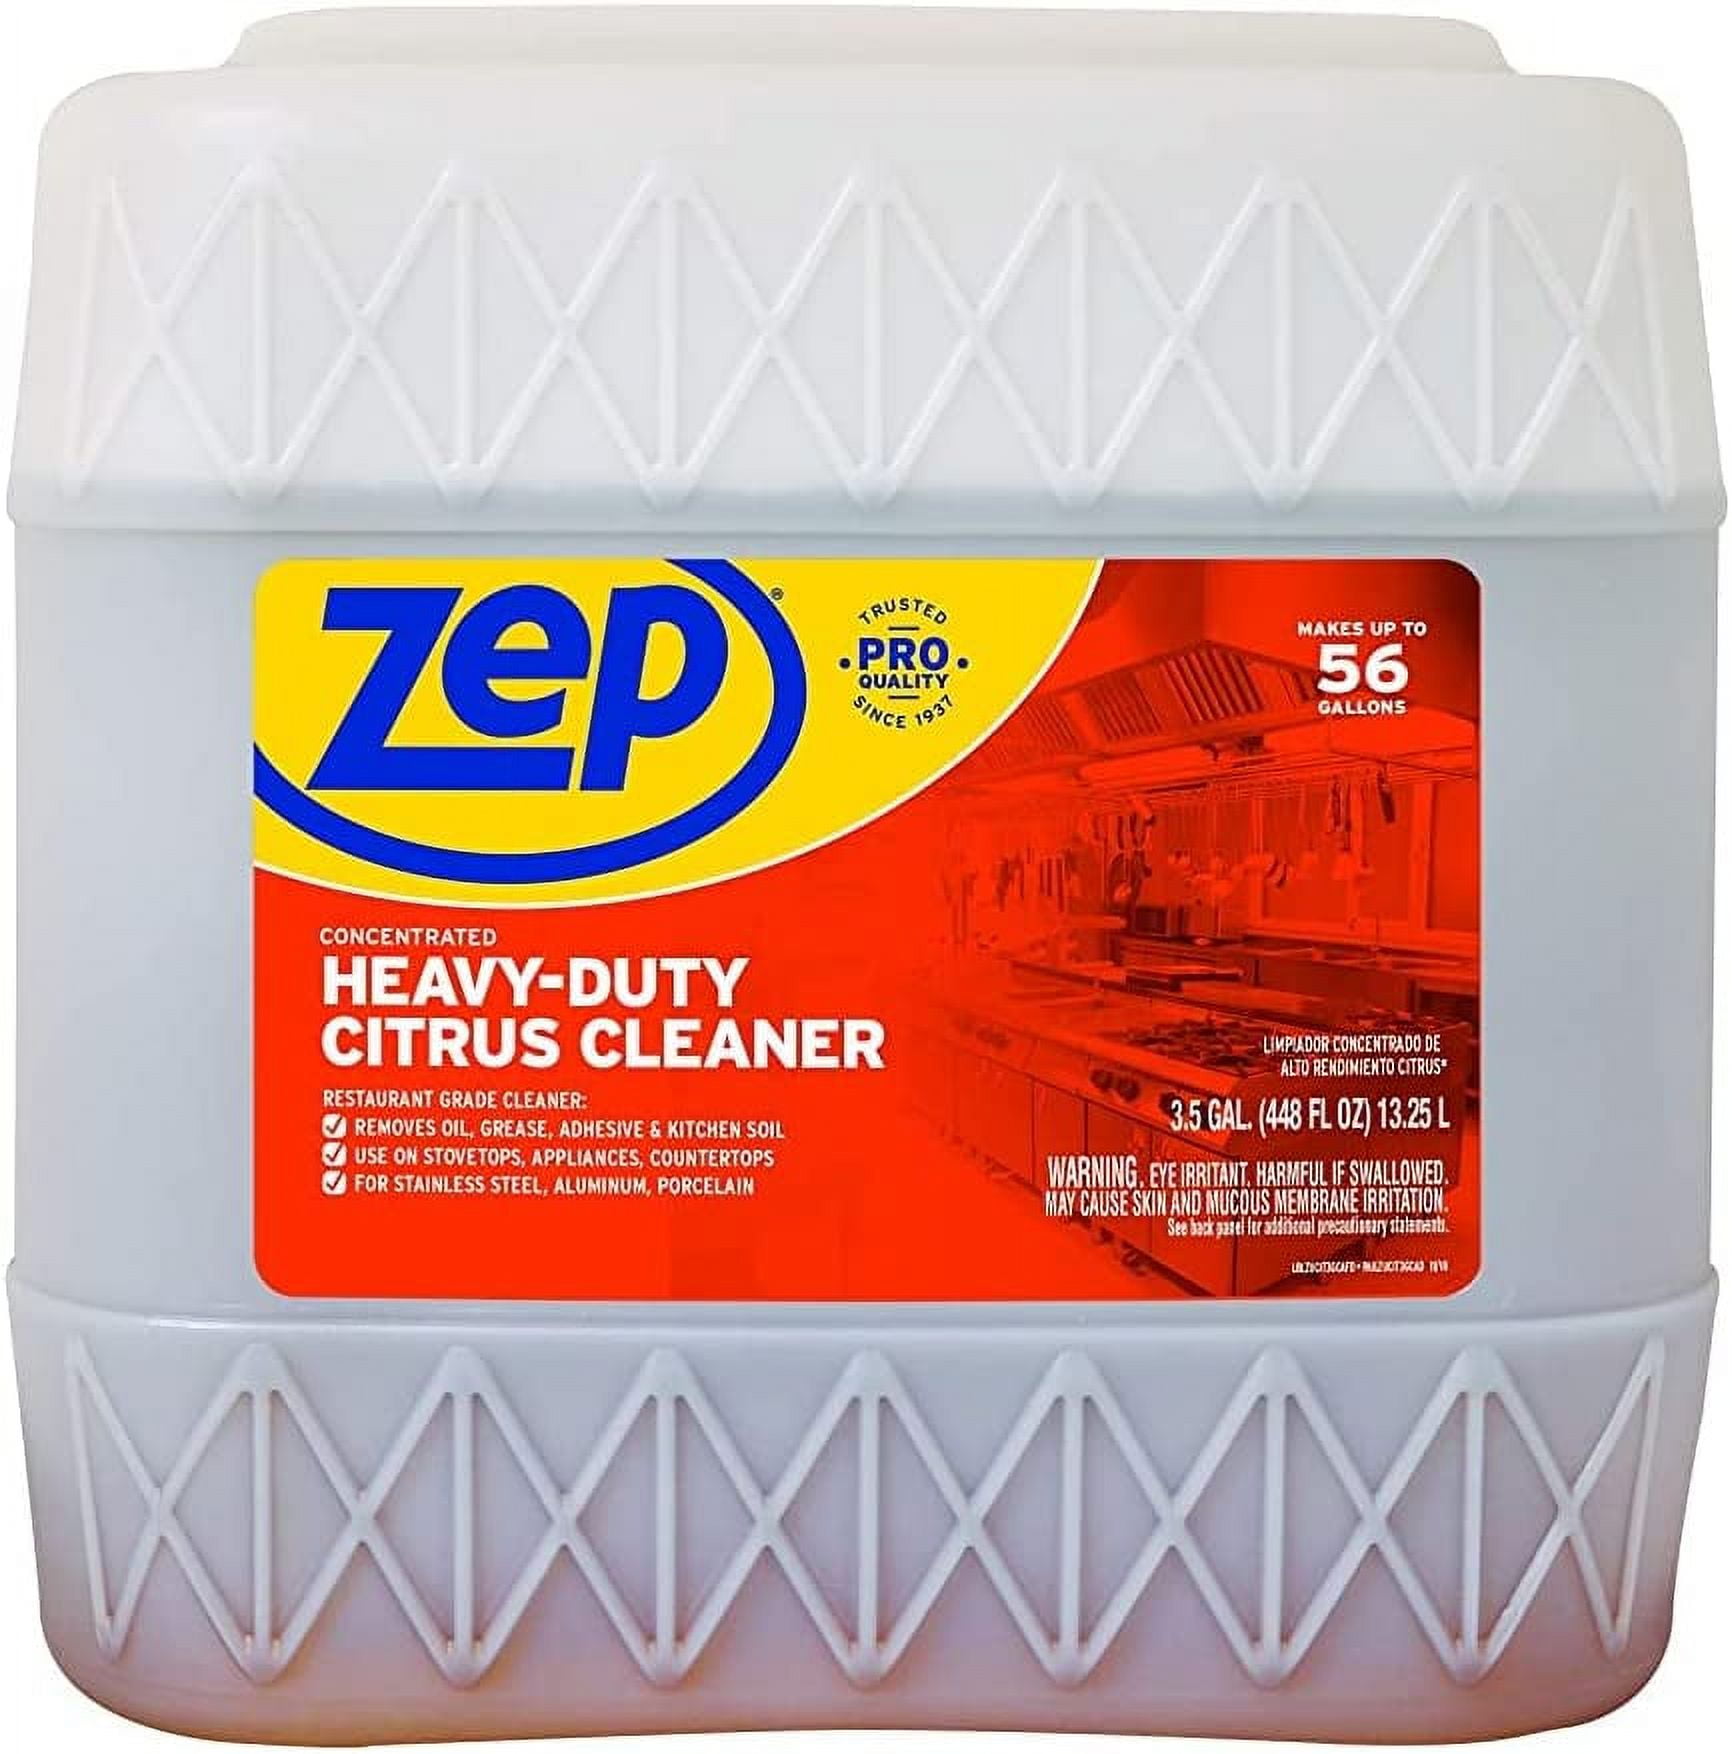 Zep Fast 505 Cleaner and Degreaser - 1 Gallon - ZU505128 - Great for  Grills, Plastics, Metal, and More! (4)